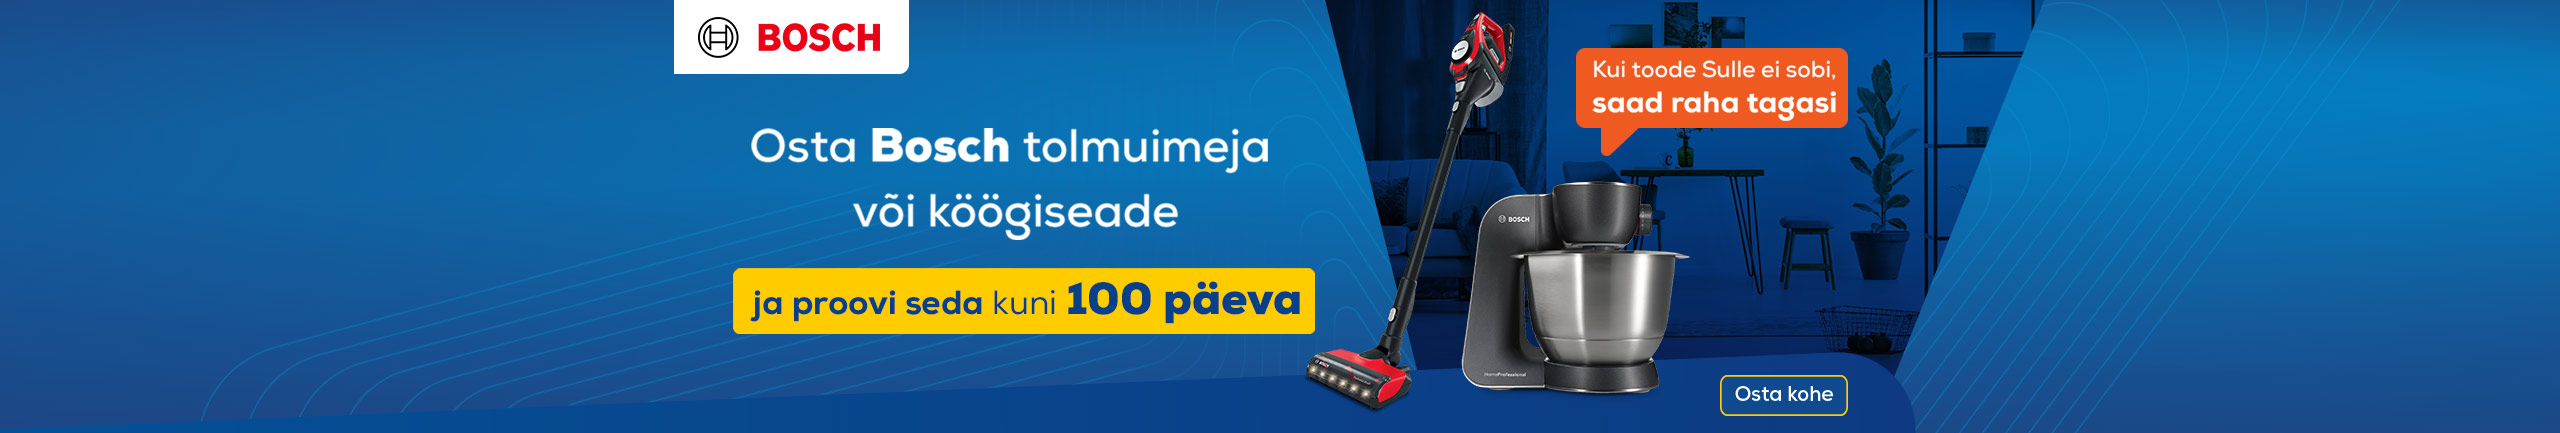 Try Bosch small kitchen appliances and vacuum cleaners for 100 days!